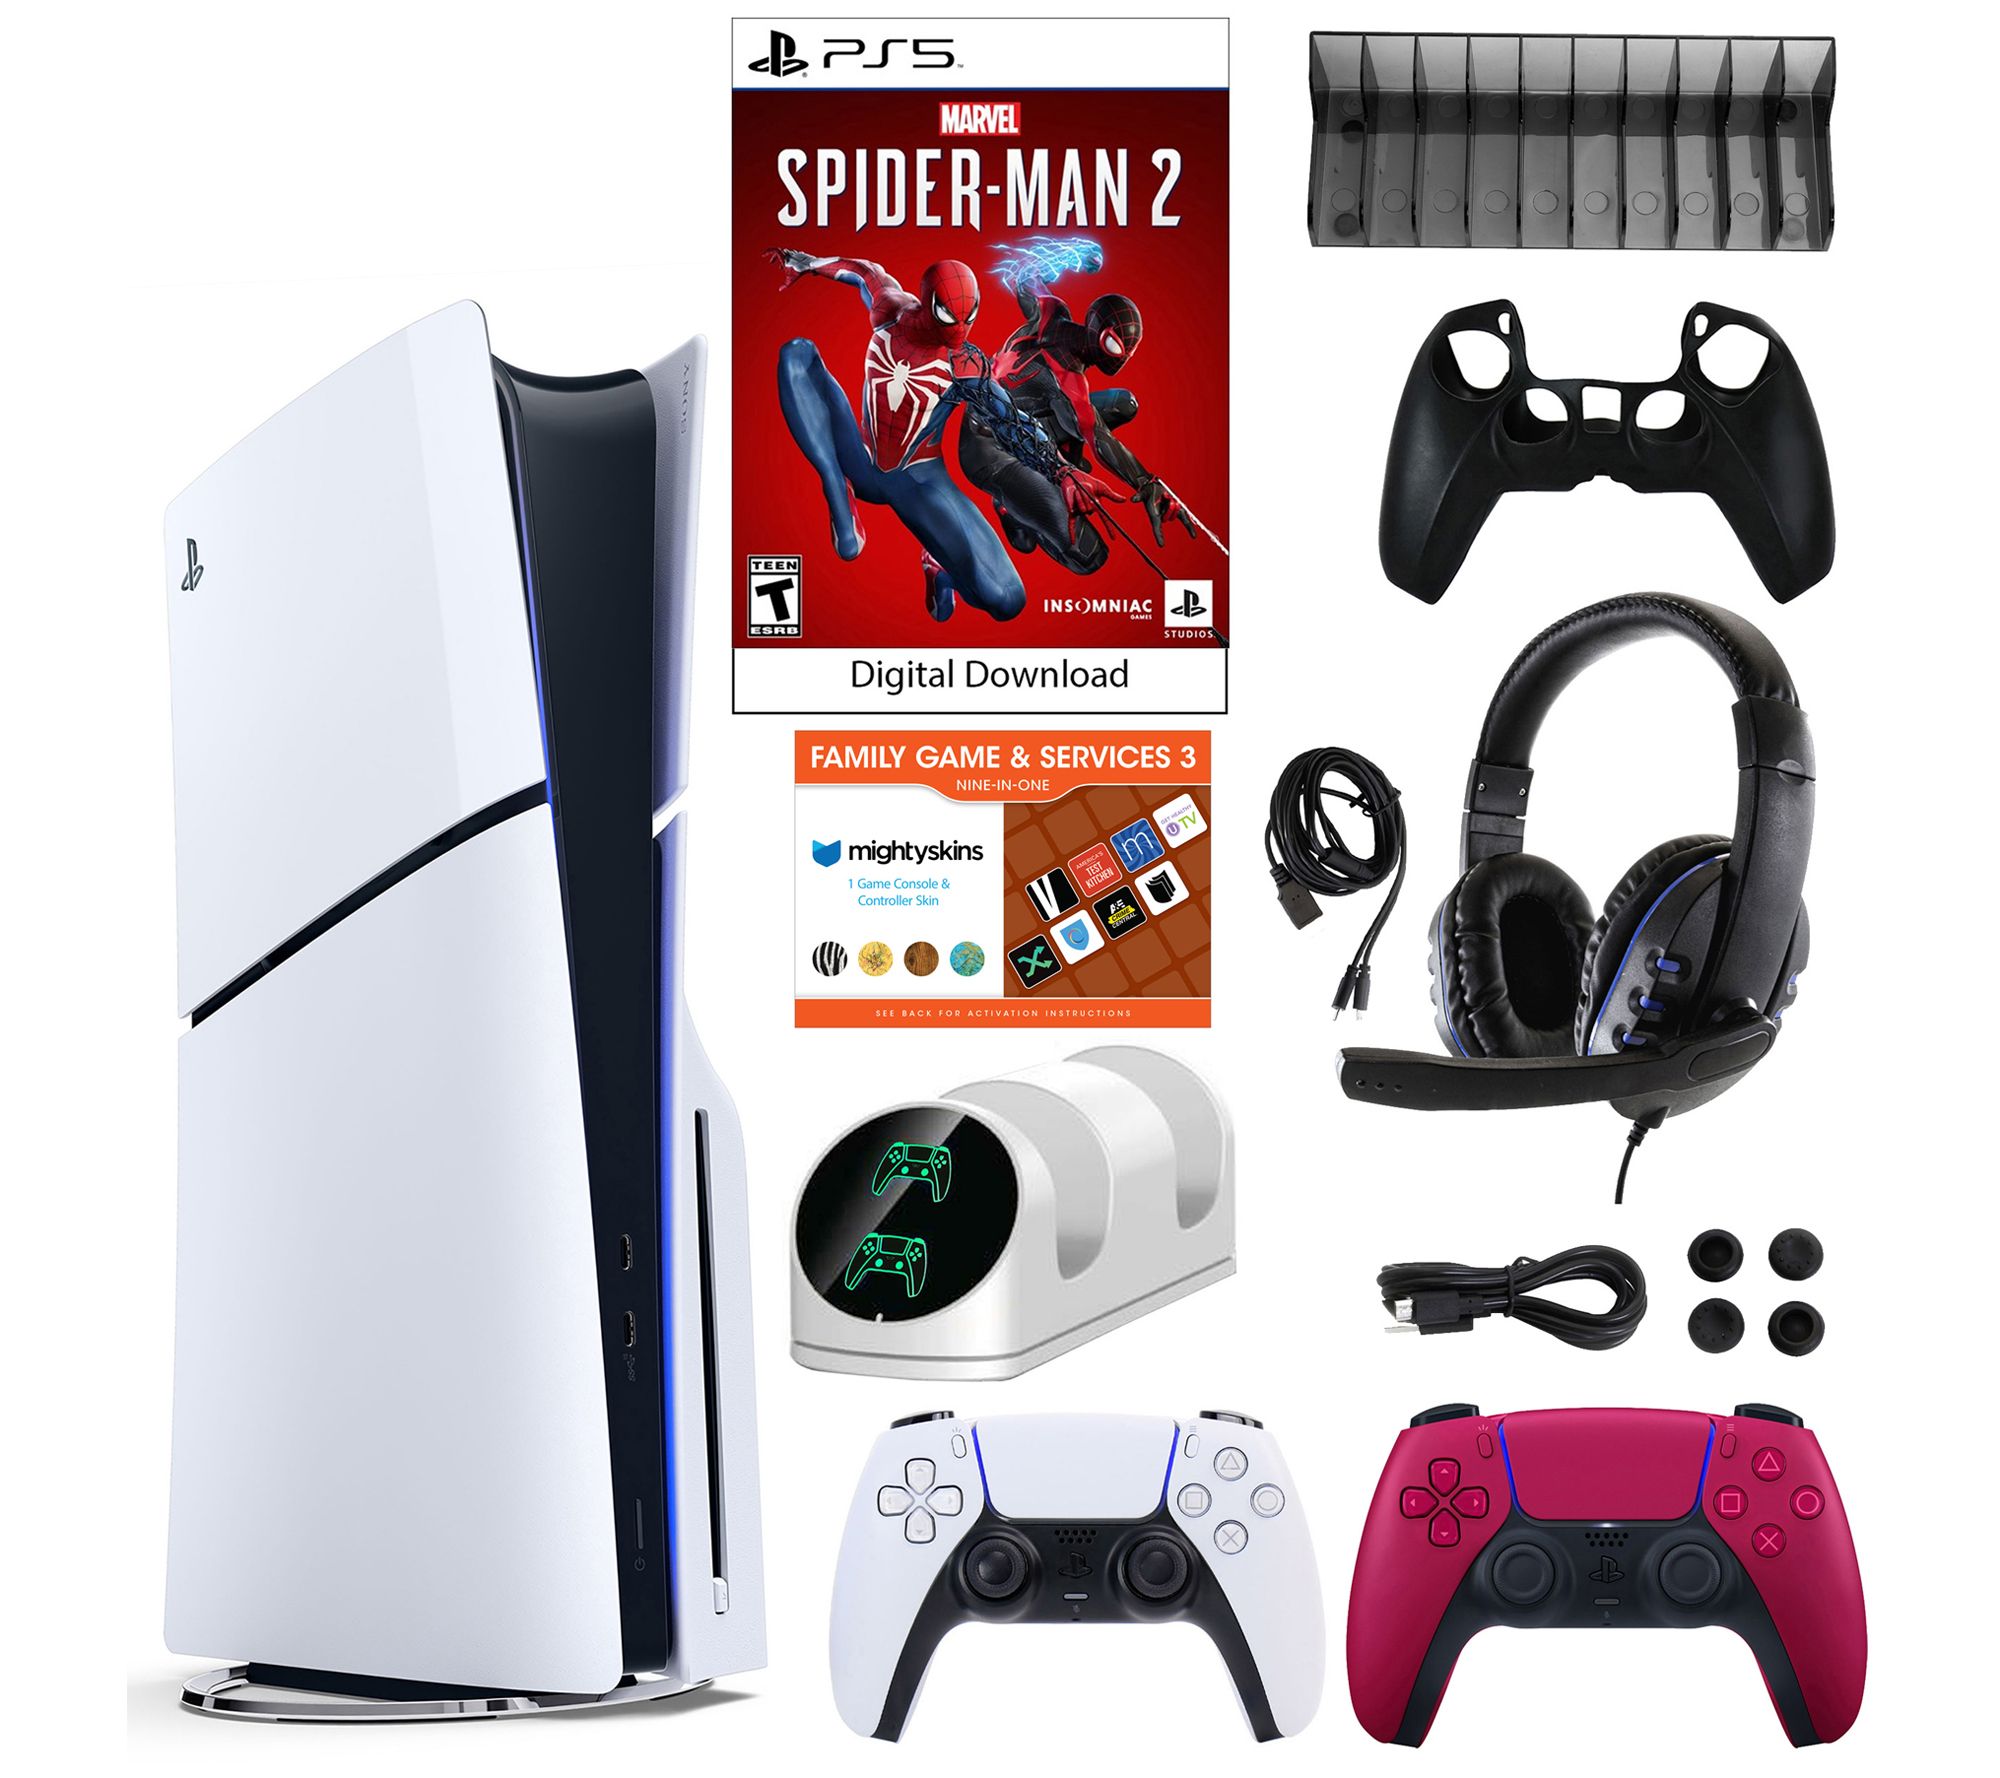 Buy PS5 Consoles, Games and Accessories